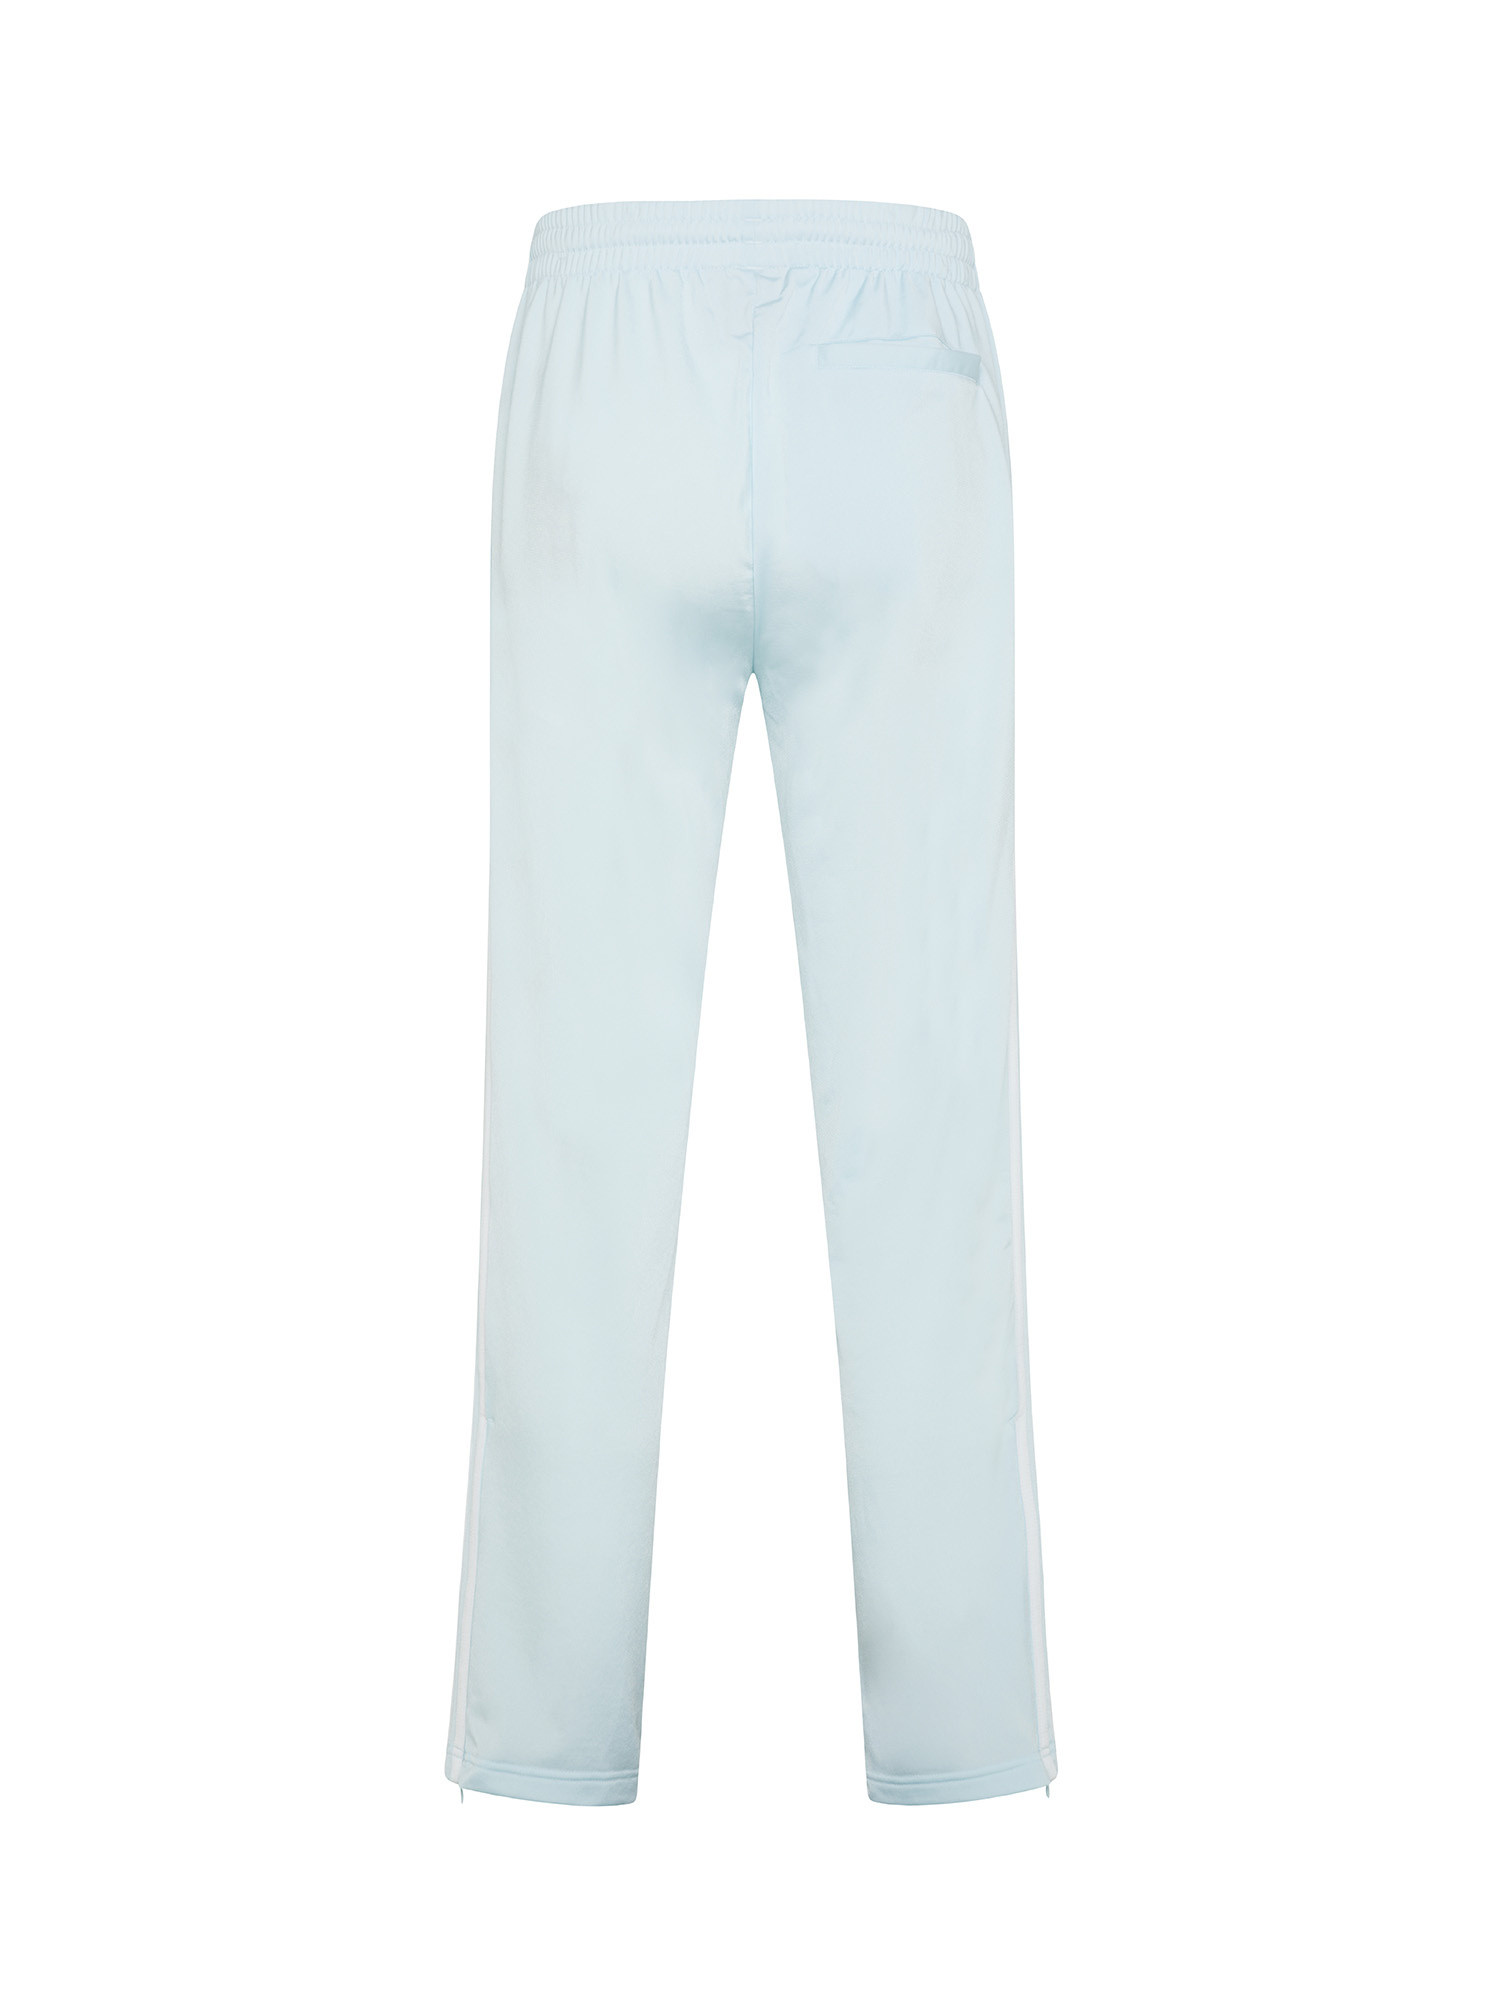 Adidas - Adicolor sports trousers, Light Blue, large image number 1